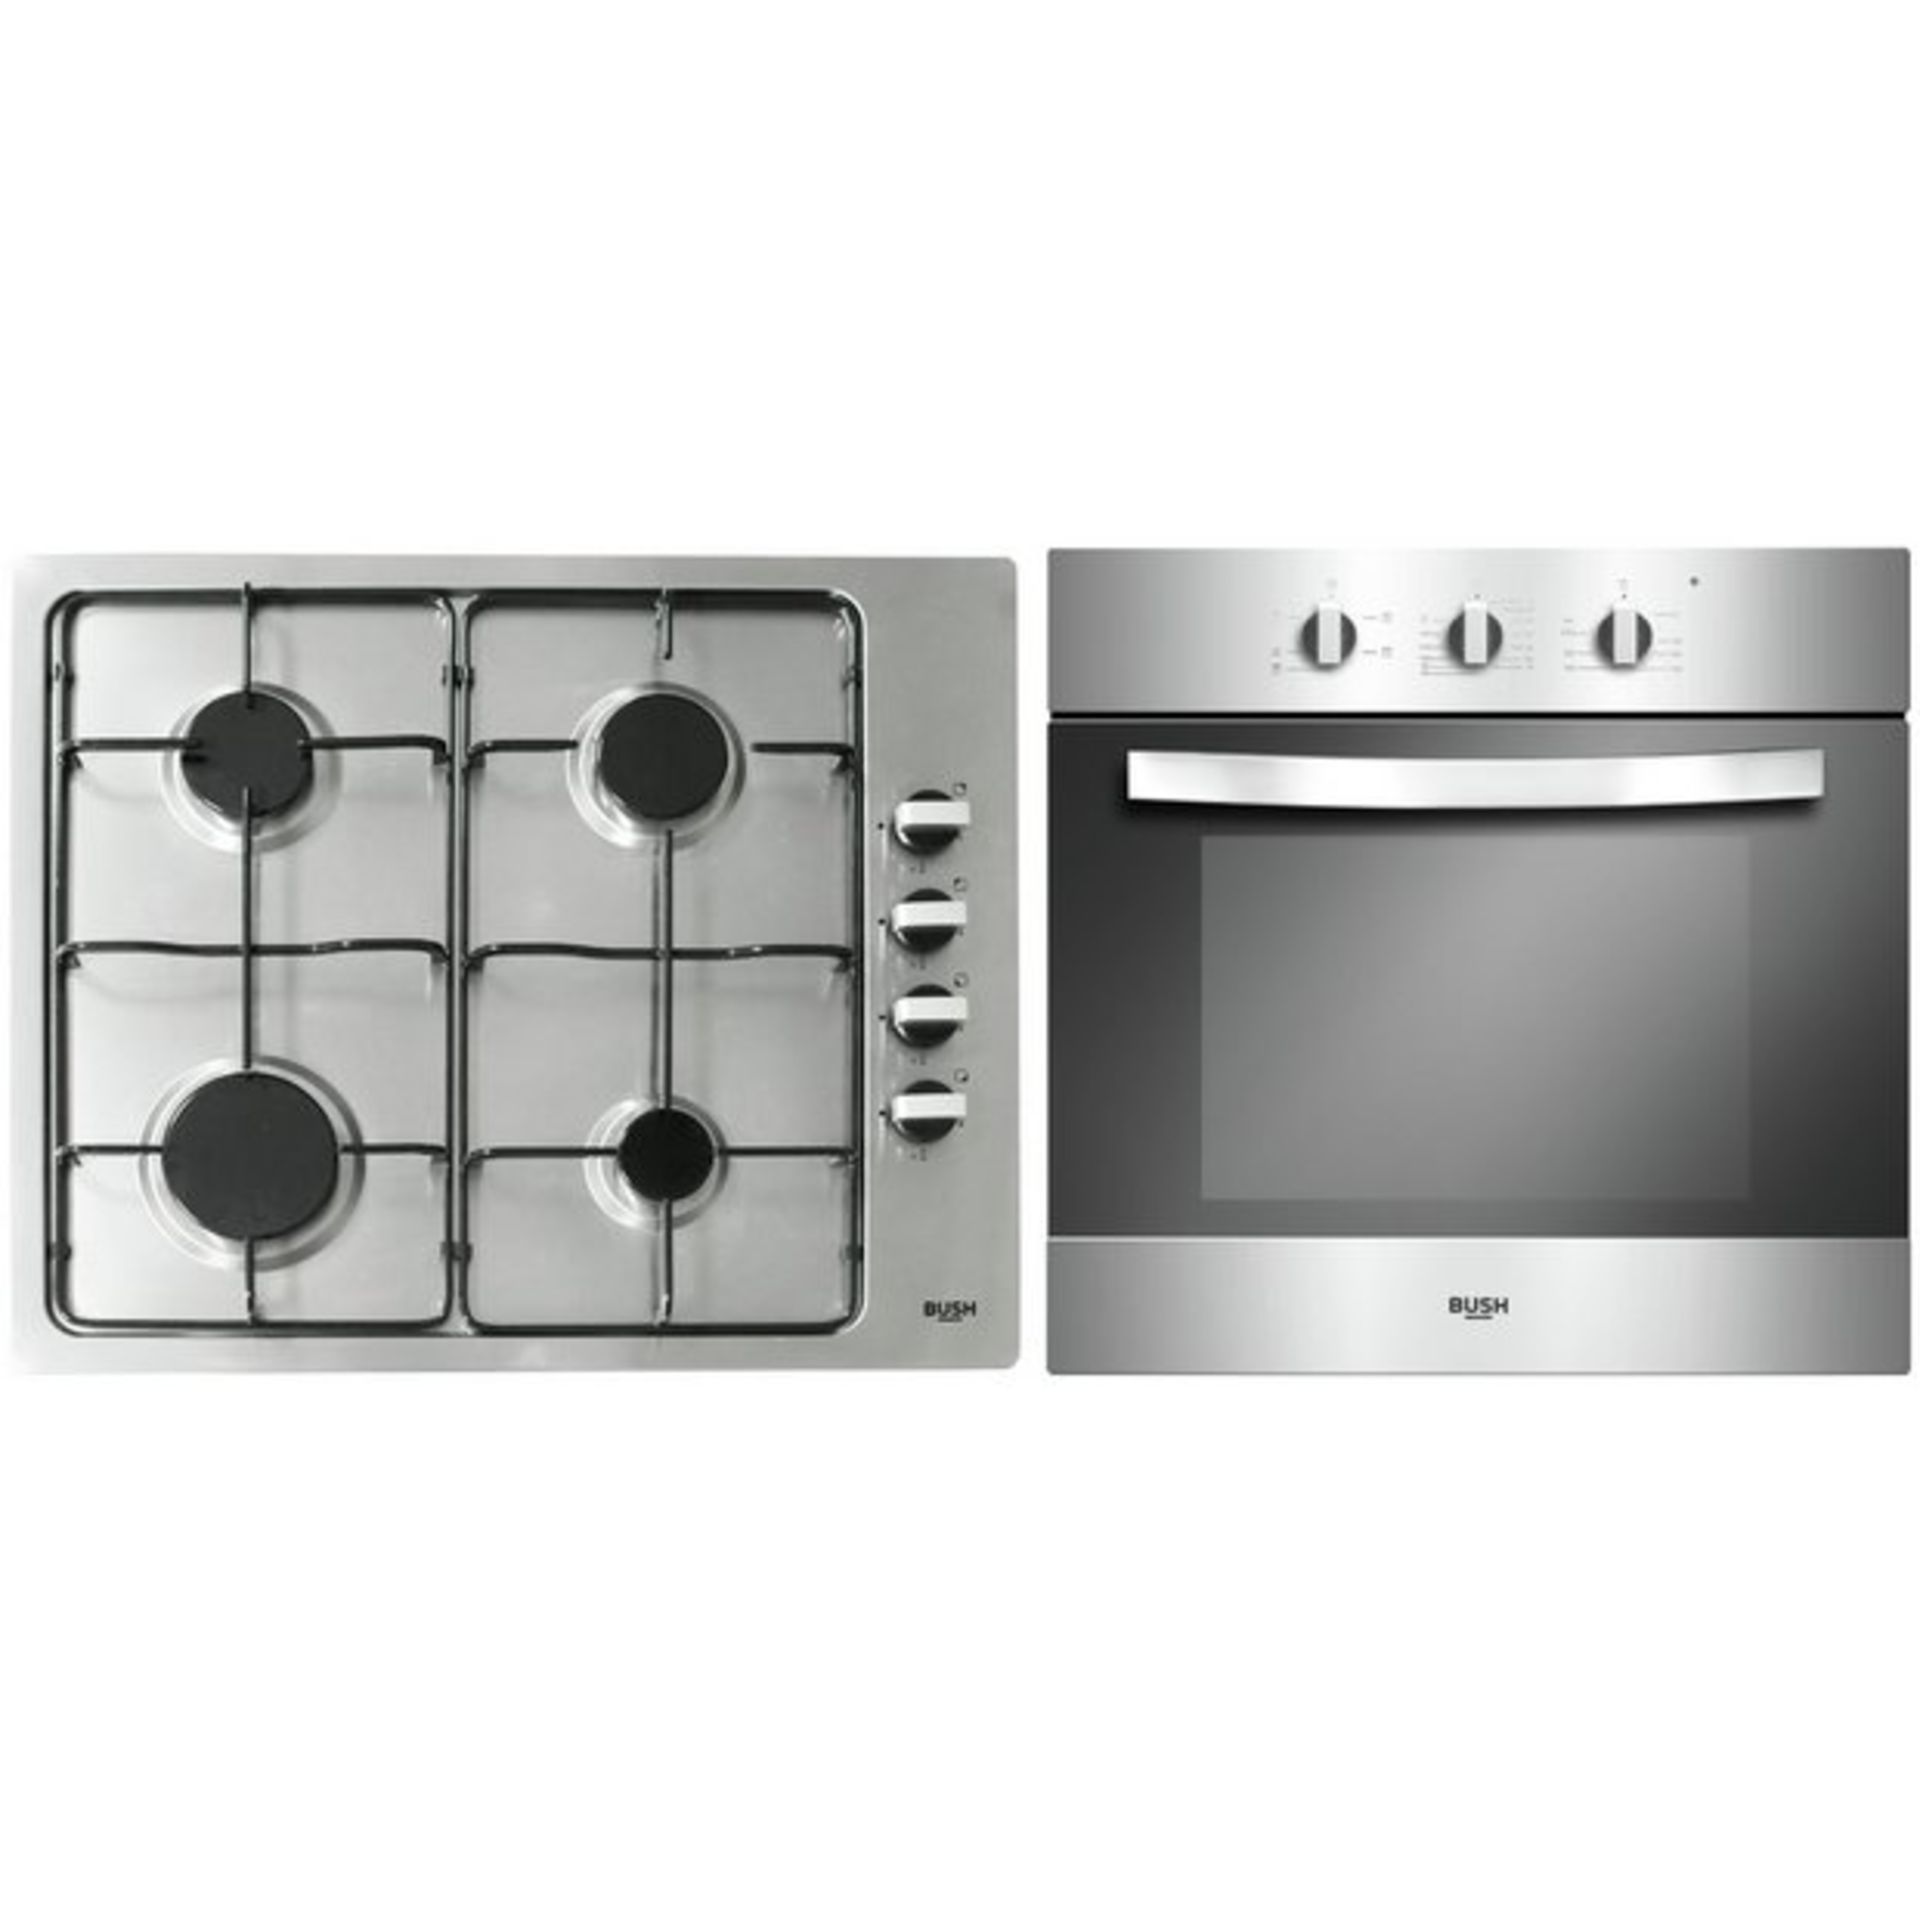 + VAT Grade A/B Bush LSBGHP Built In Electric Oven With Gas Hob Pack - 57 Litre Capacity Oven - ISP